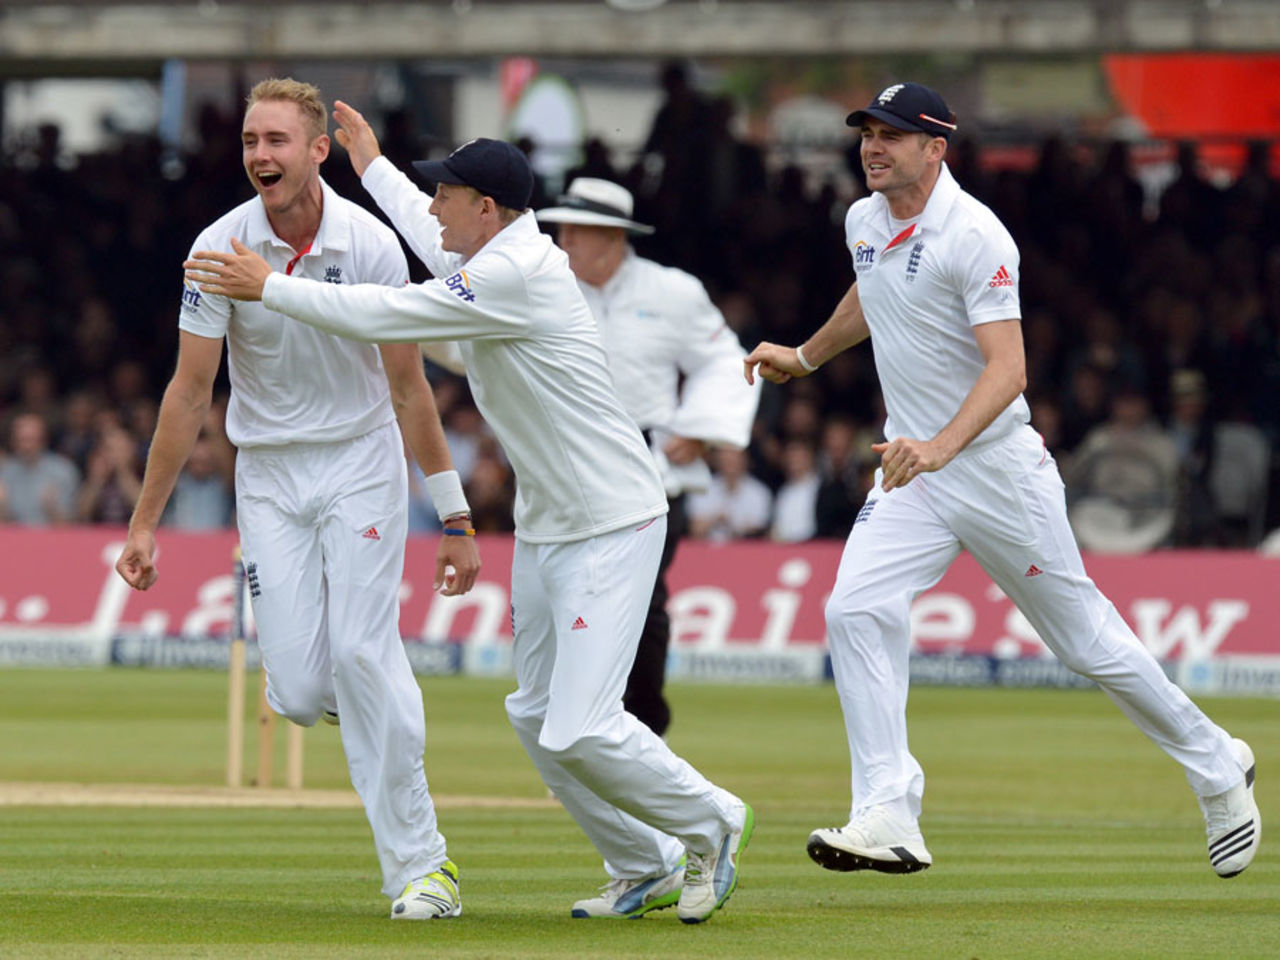 Stuart Broad is delighted at removing Ross Taylor for a duck, England v New Zealand, 1st Investec Test, Lord's, 4th day, May 19, 2013